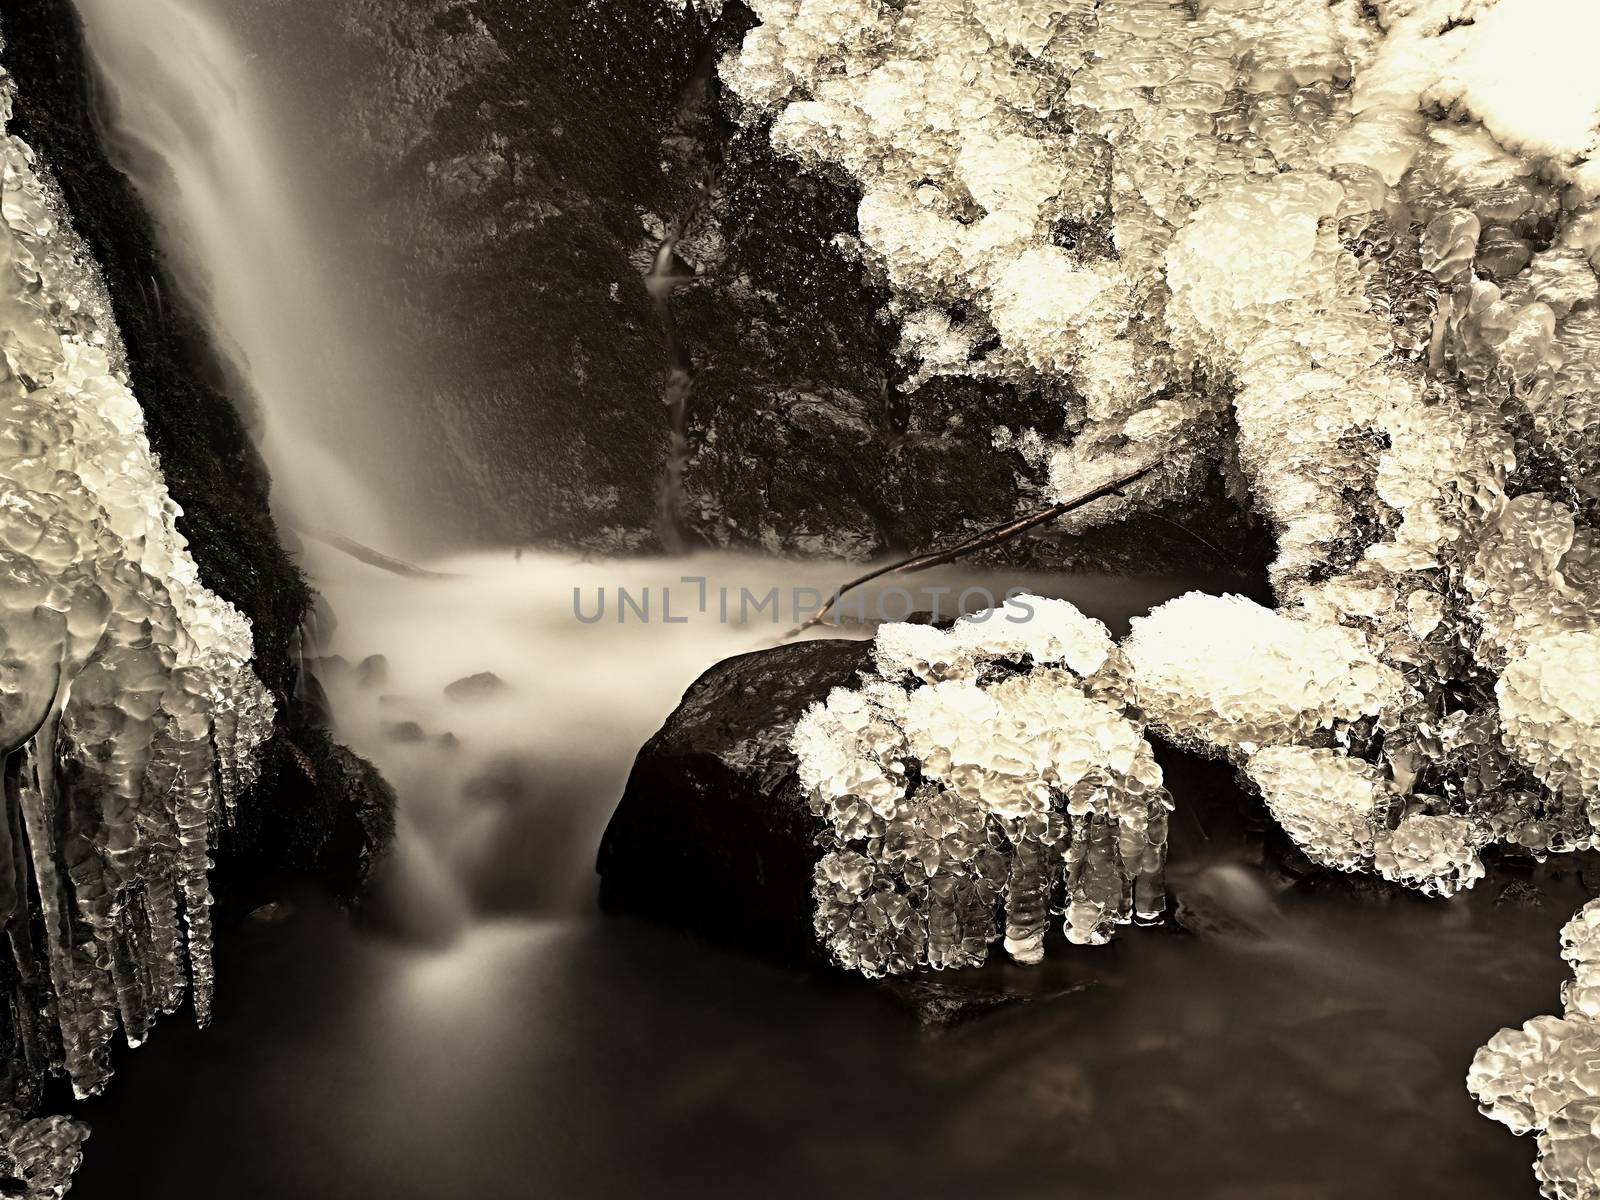 Frozen waterfall. Winter creek, icy stones and branches by rdonar2